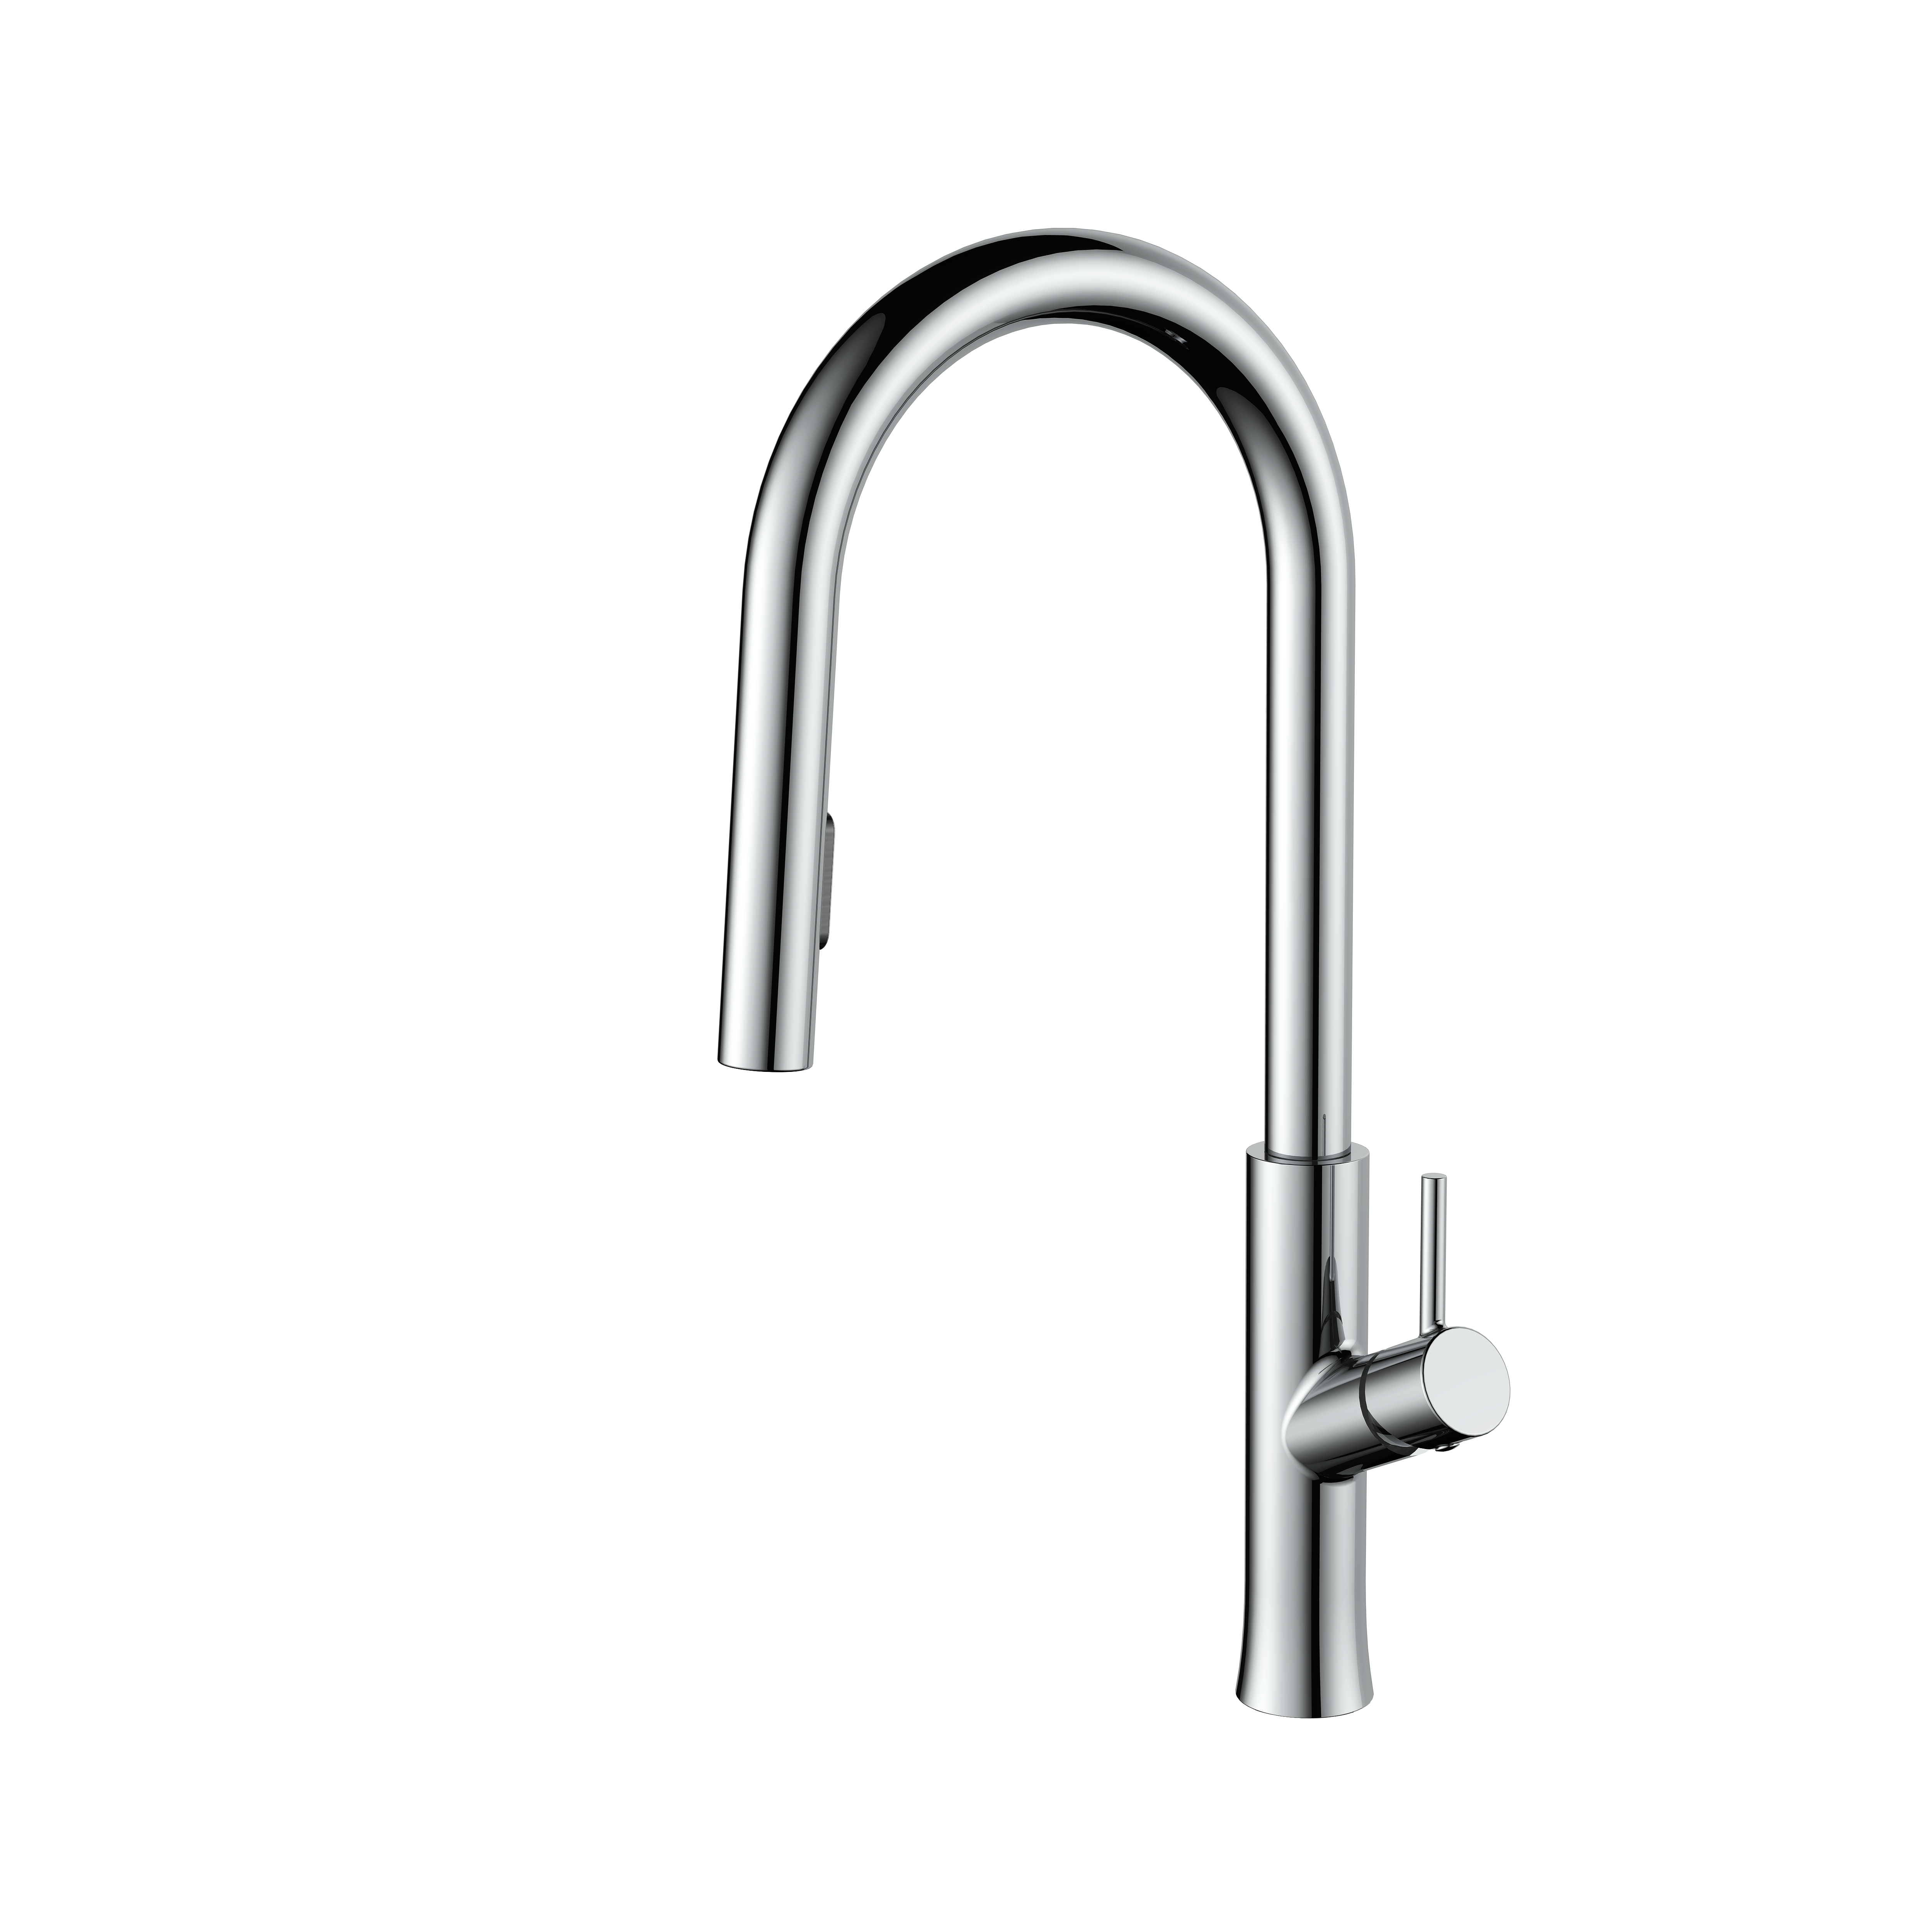 Super Chrome Kitchen Sink Faucet with Pull Down Sprayer